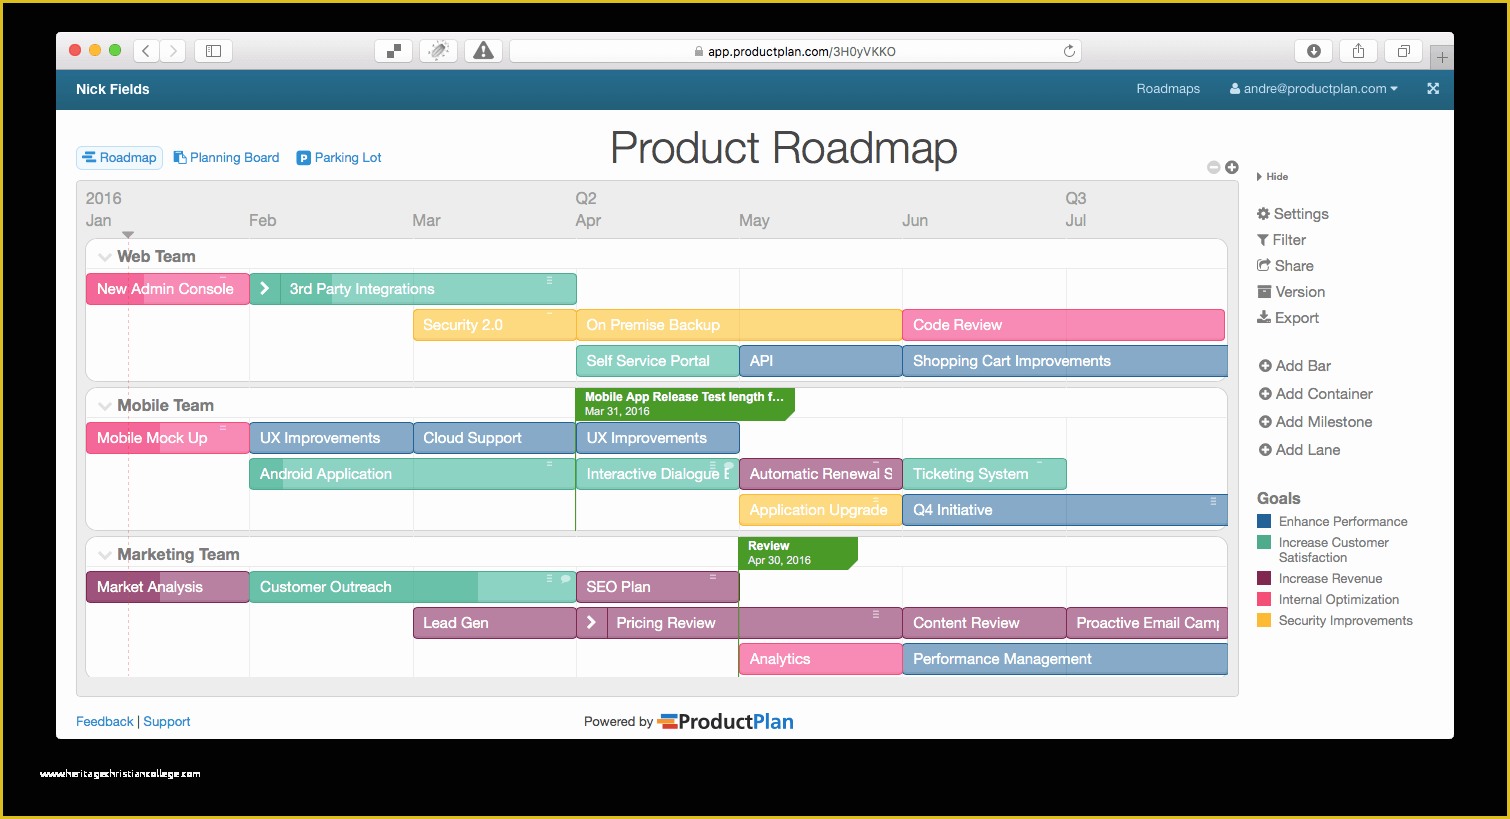 Free Marketing Roadmap Template Of Using top Down Product Strategy to Plan Your Roadmap